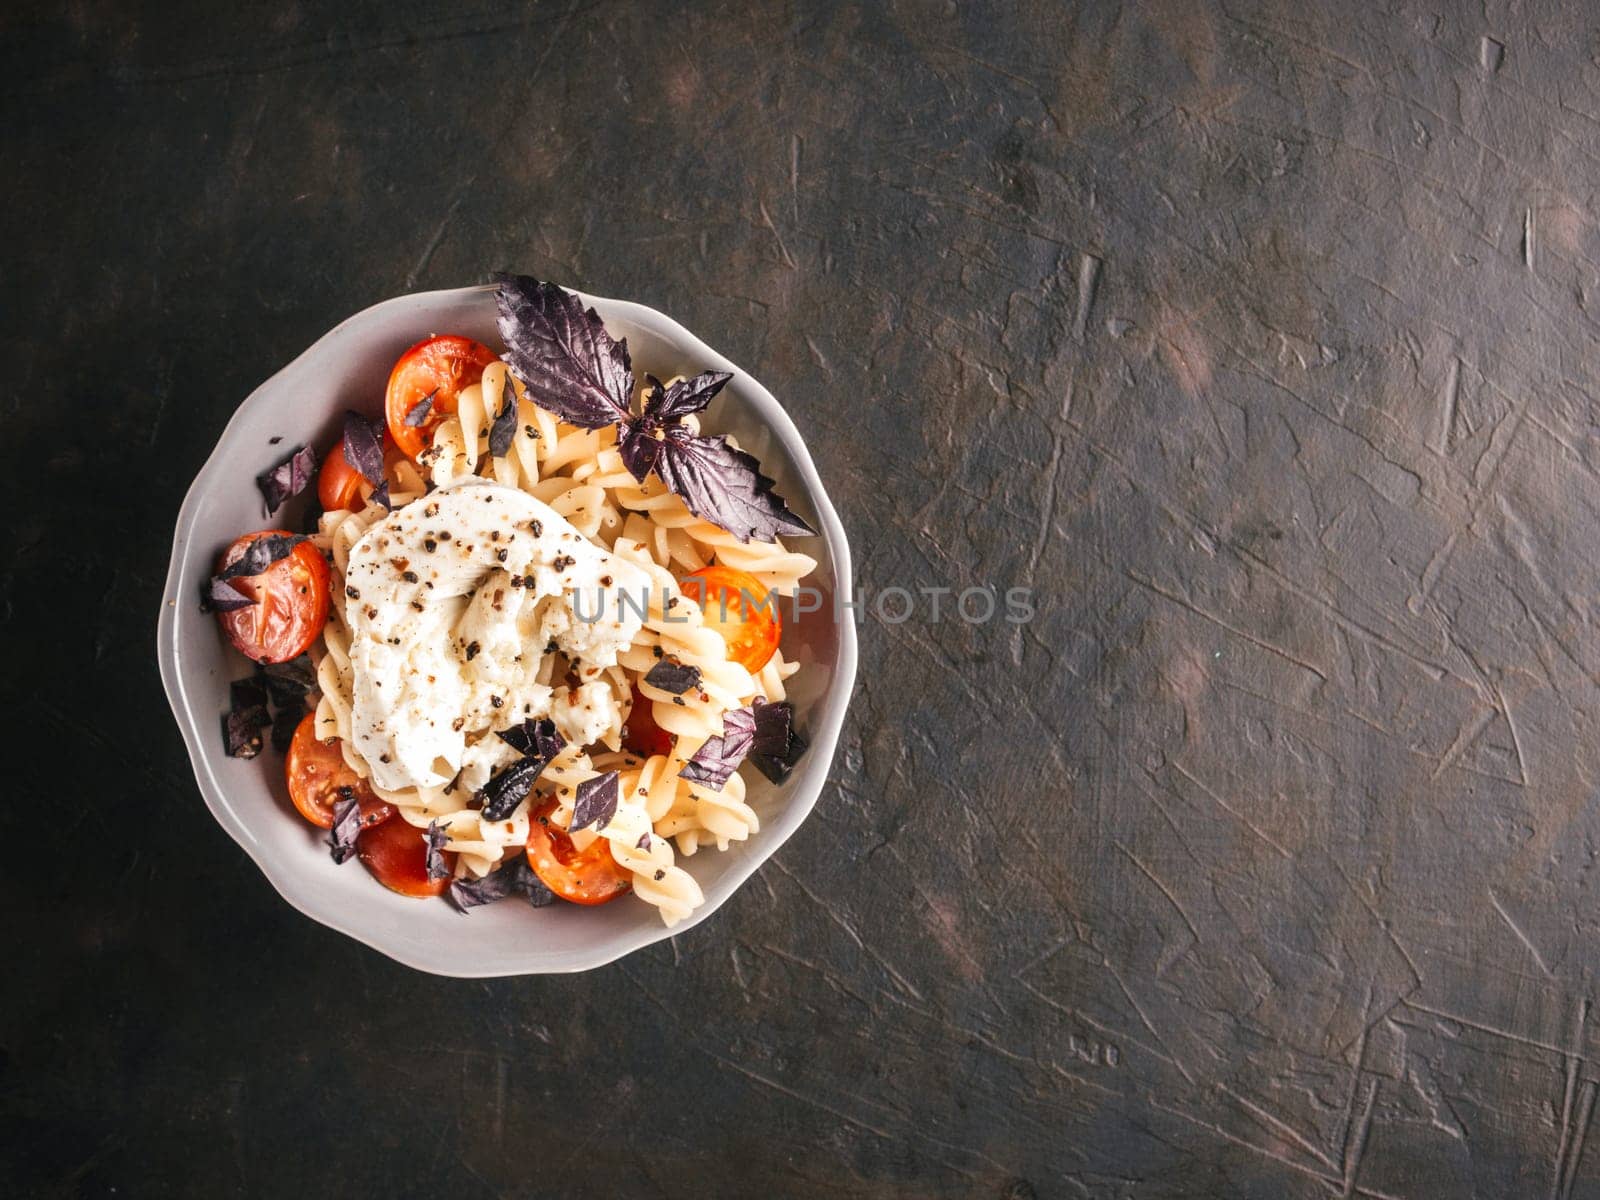 Tasty italian fusilli pasta with cherry, mozarella or buratta cheese and fresh basil. Dish with pasta on black concrete background. Top view. Copy space. Healthy food concept and recipe idea.